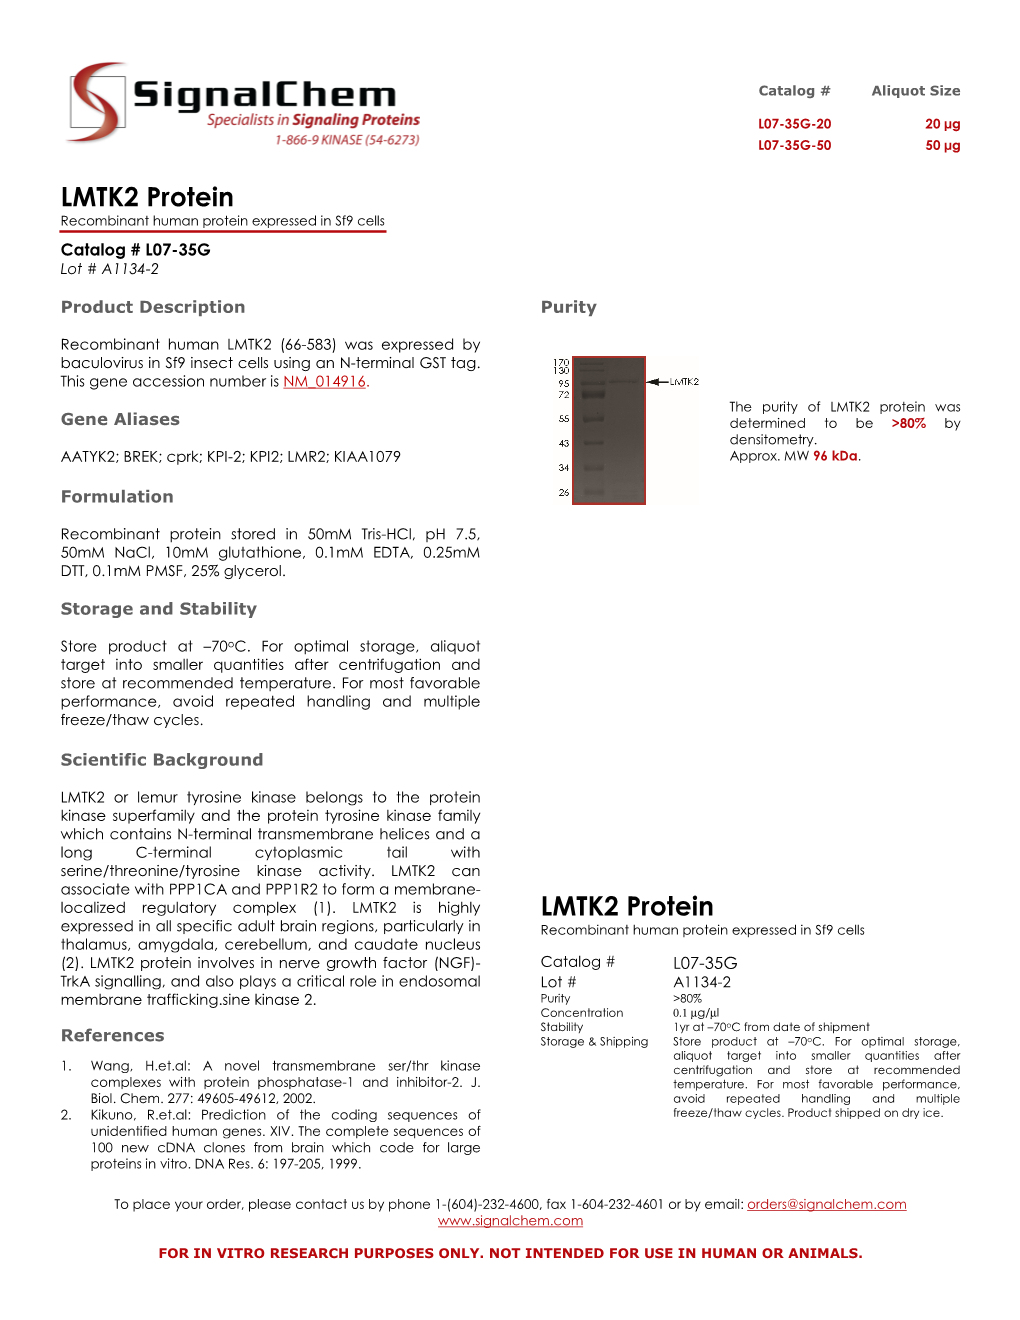 LMTK2 Protein Recombinant Human Protein Expressed in Sf9 Cells